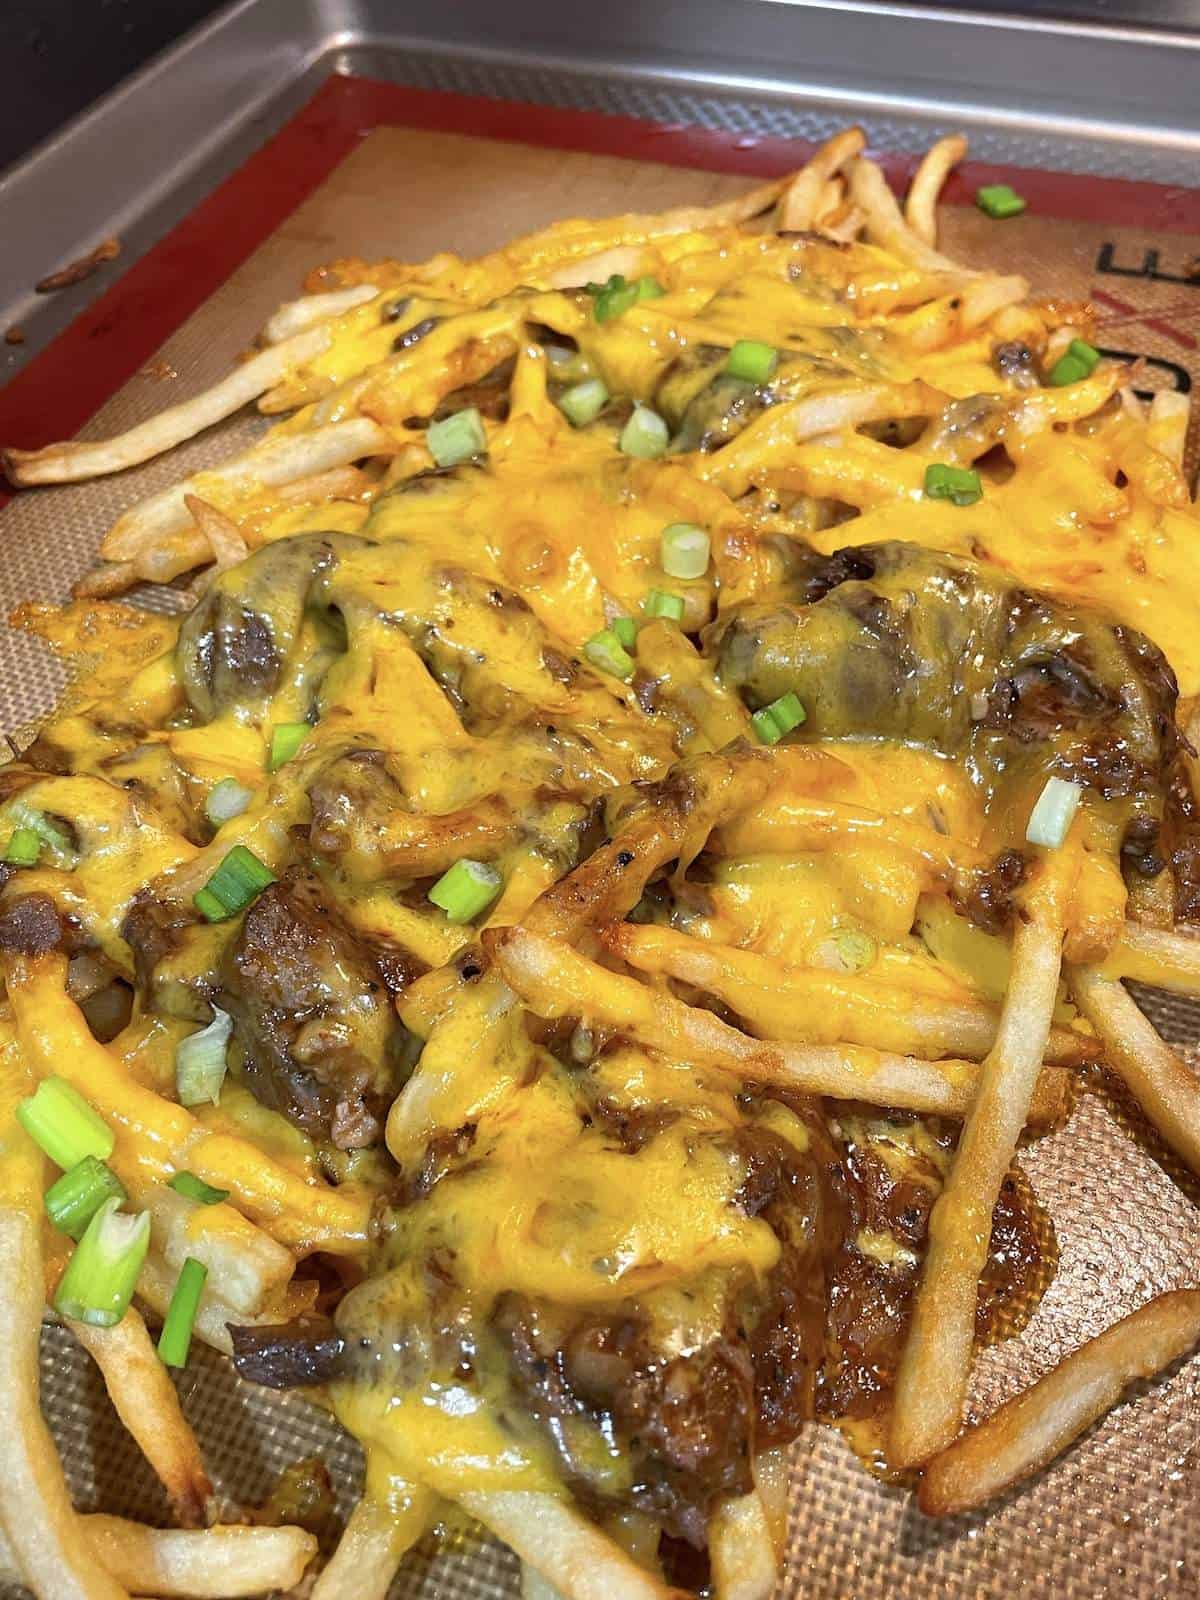 A baking sheet with French fries topped in roast beef debris with cheese on top.